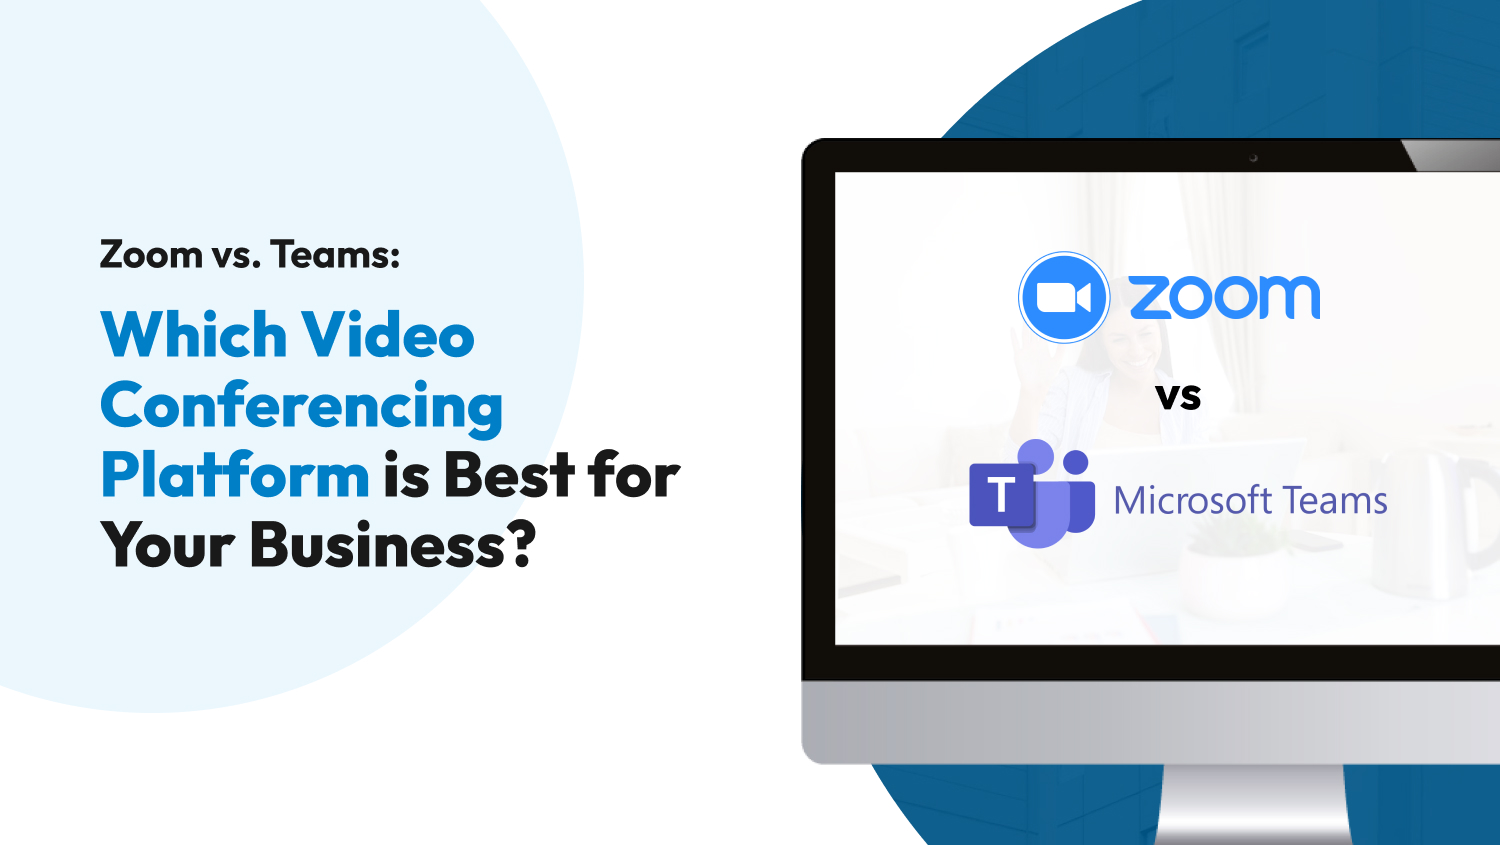 Zoom vs. Teams: Which Video Conferencing Platform is Best for Your Business?